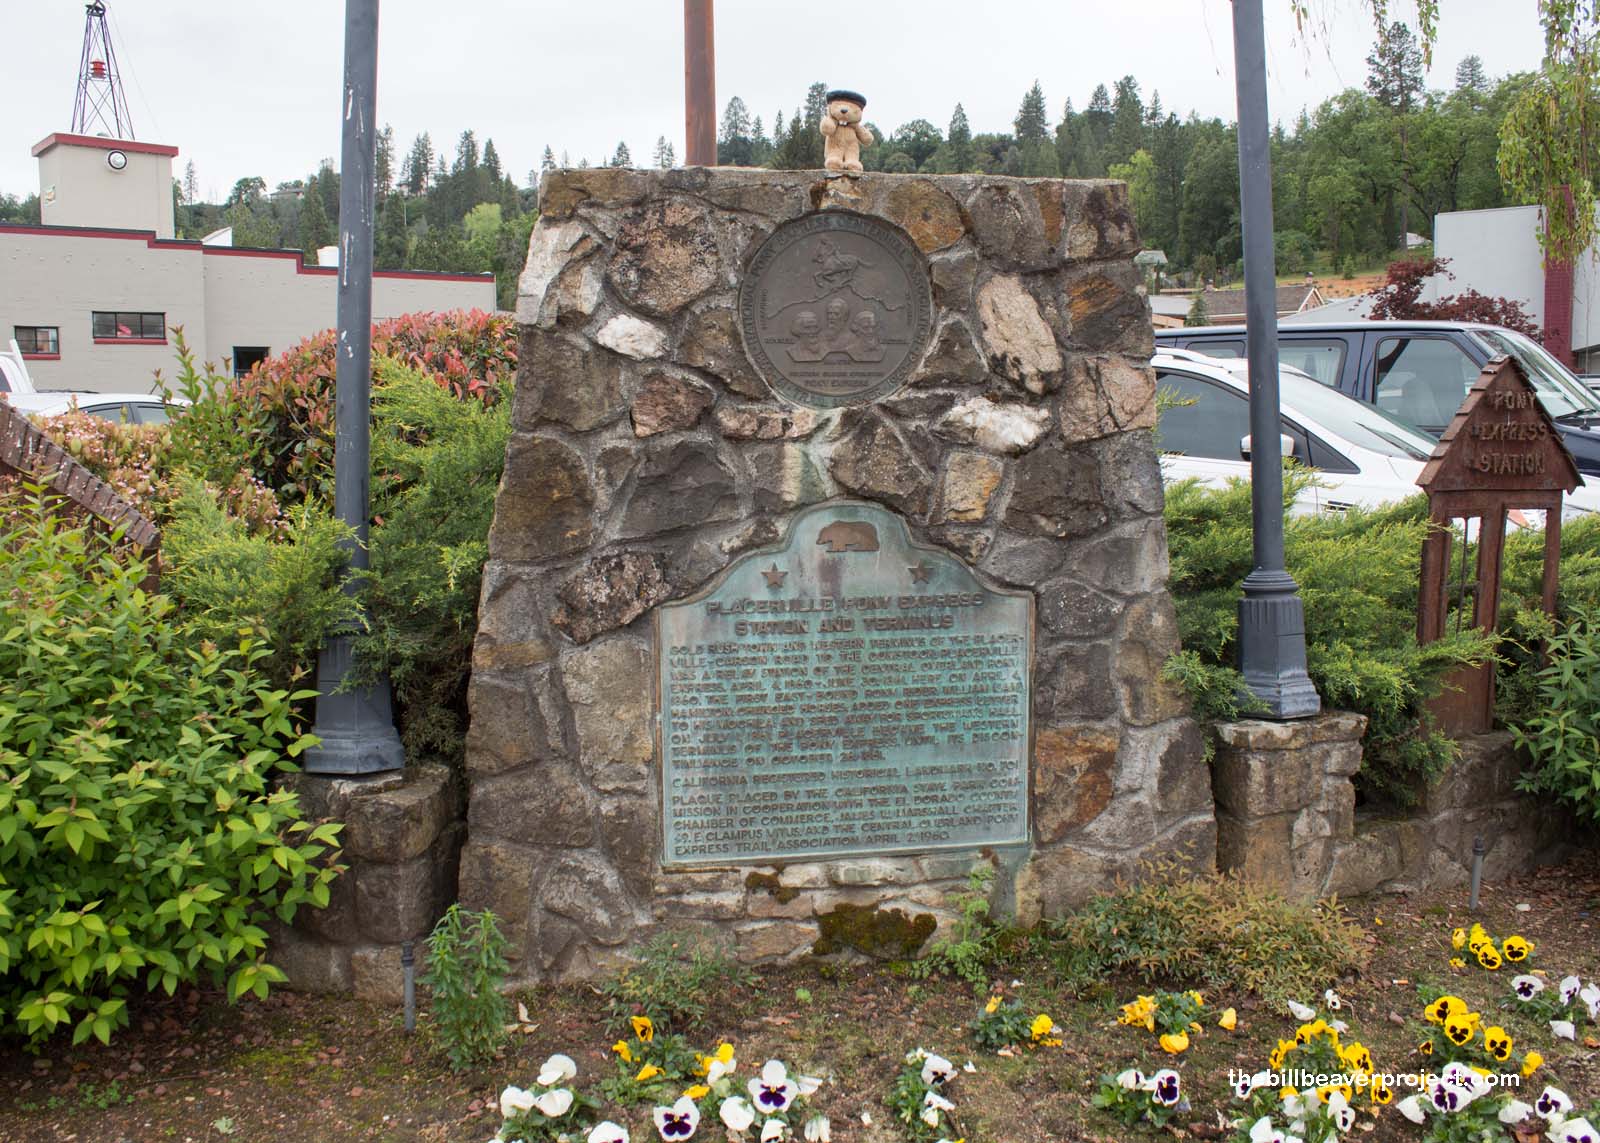 Overland Pony Express Route, Placerville